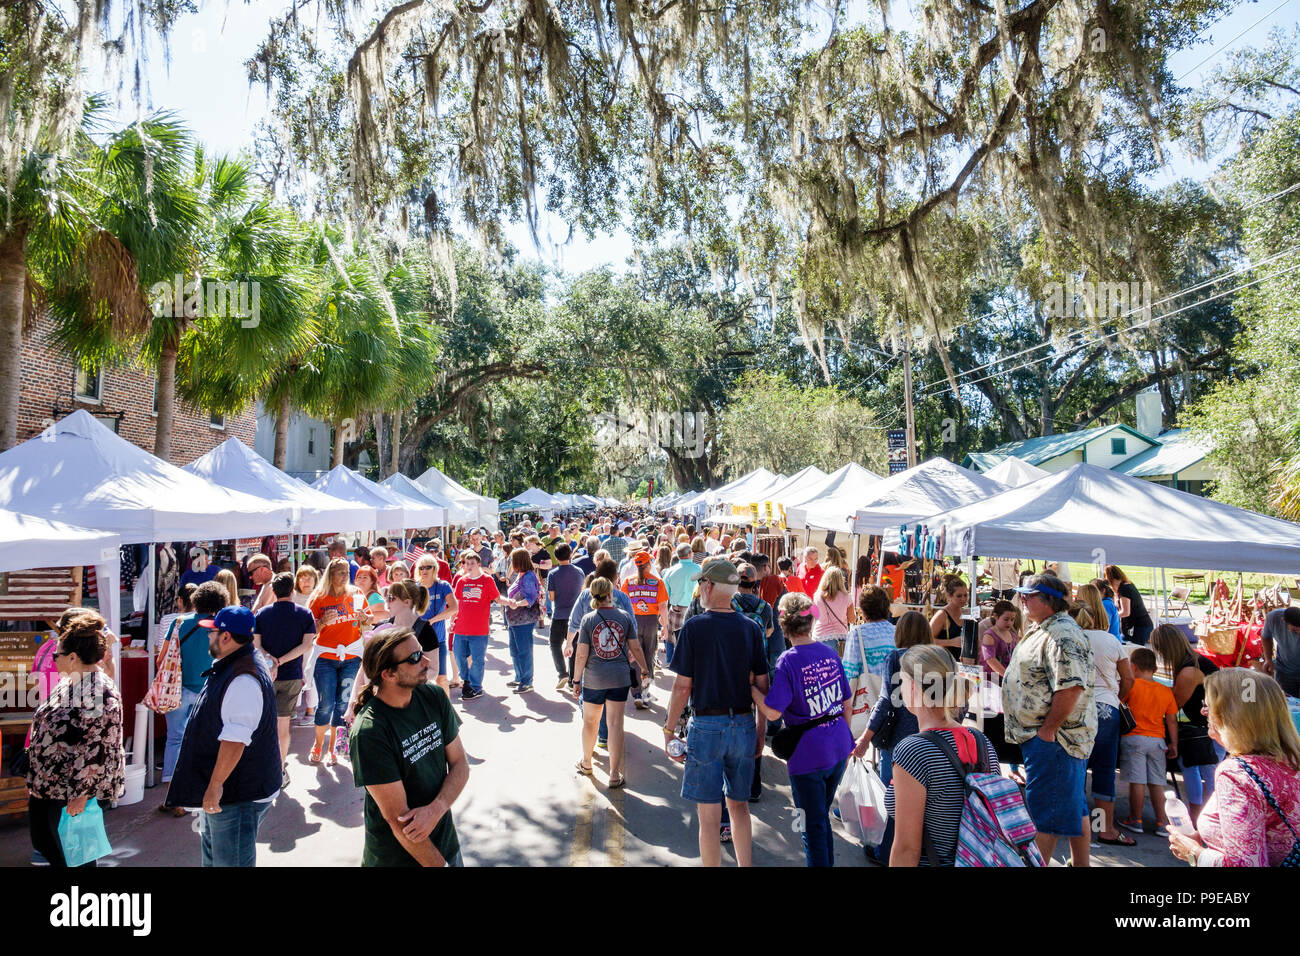 Florida,Micanopy,Fall Harvest Festival,annual small town community booths stalls vendors buying selling,crowd,strolling,families,FL171028211 Stock Photo